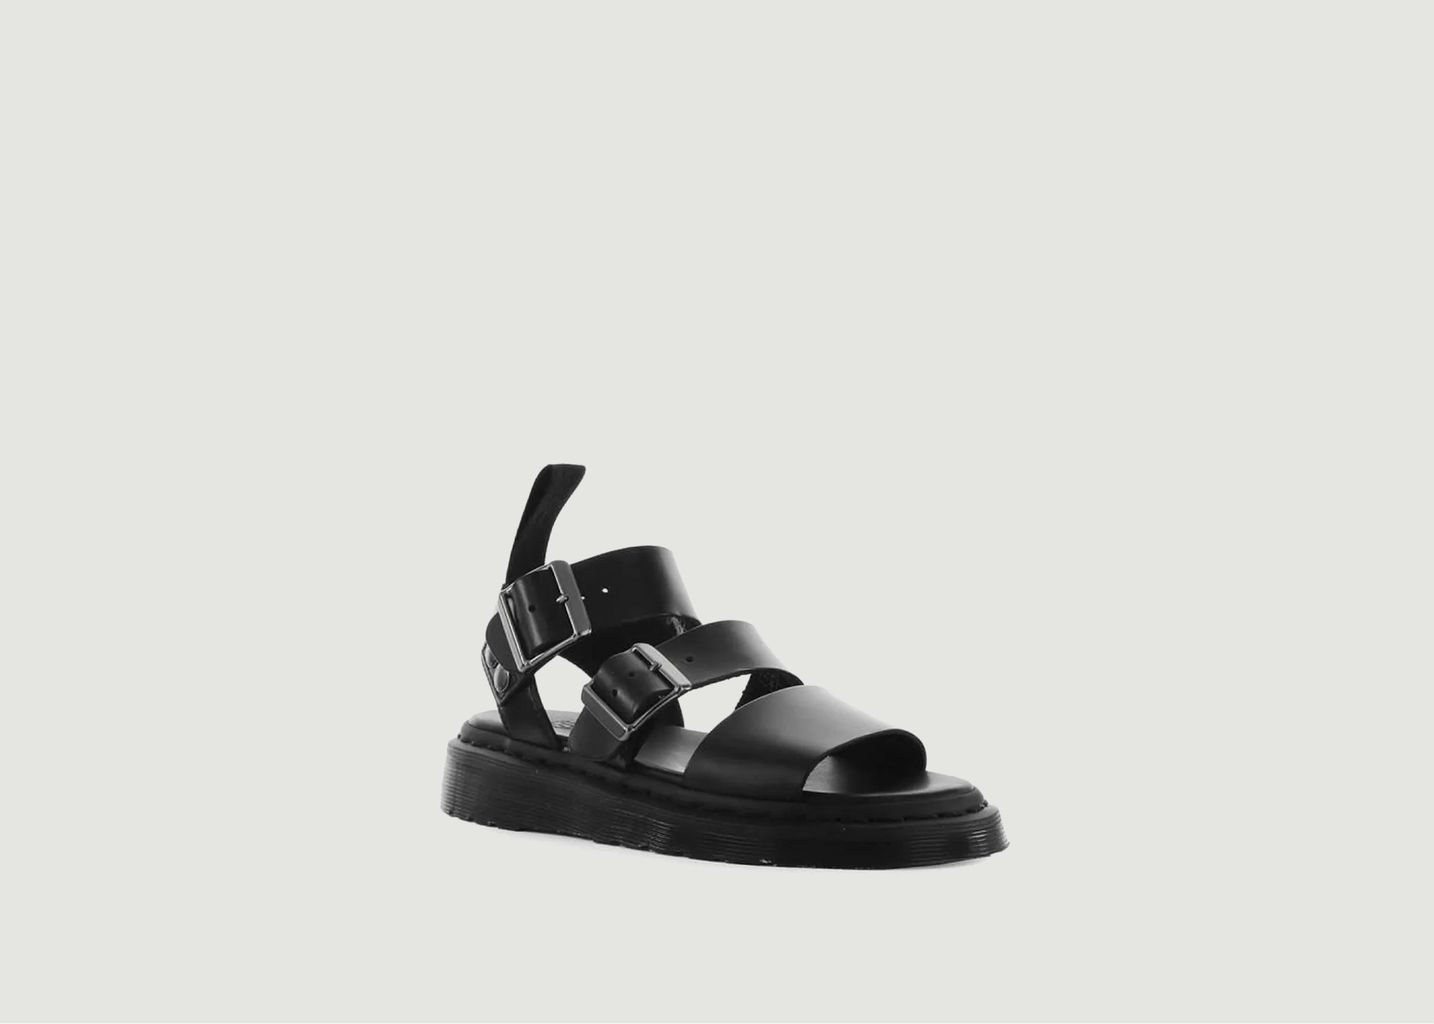 Gryphon sandals in brando leather with straps - Dr. Martens